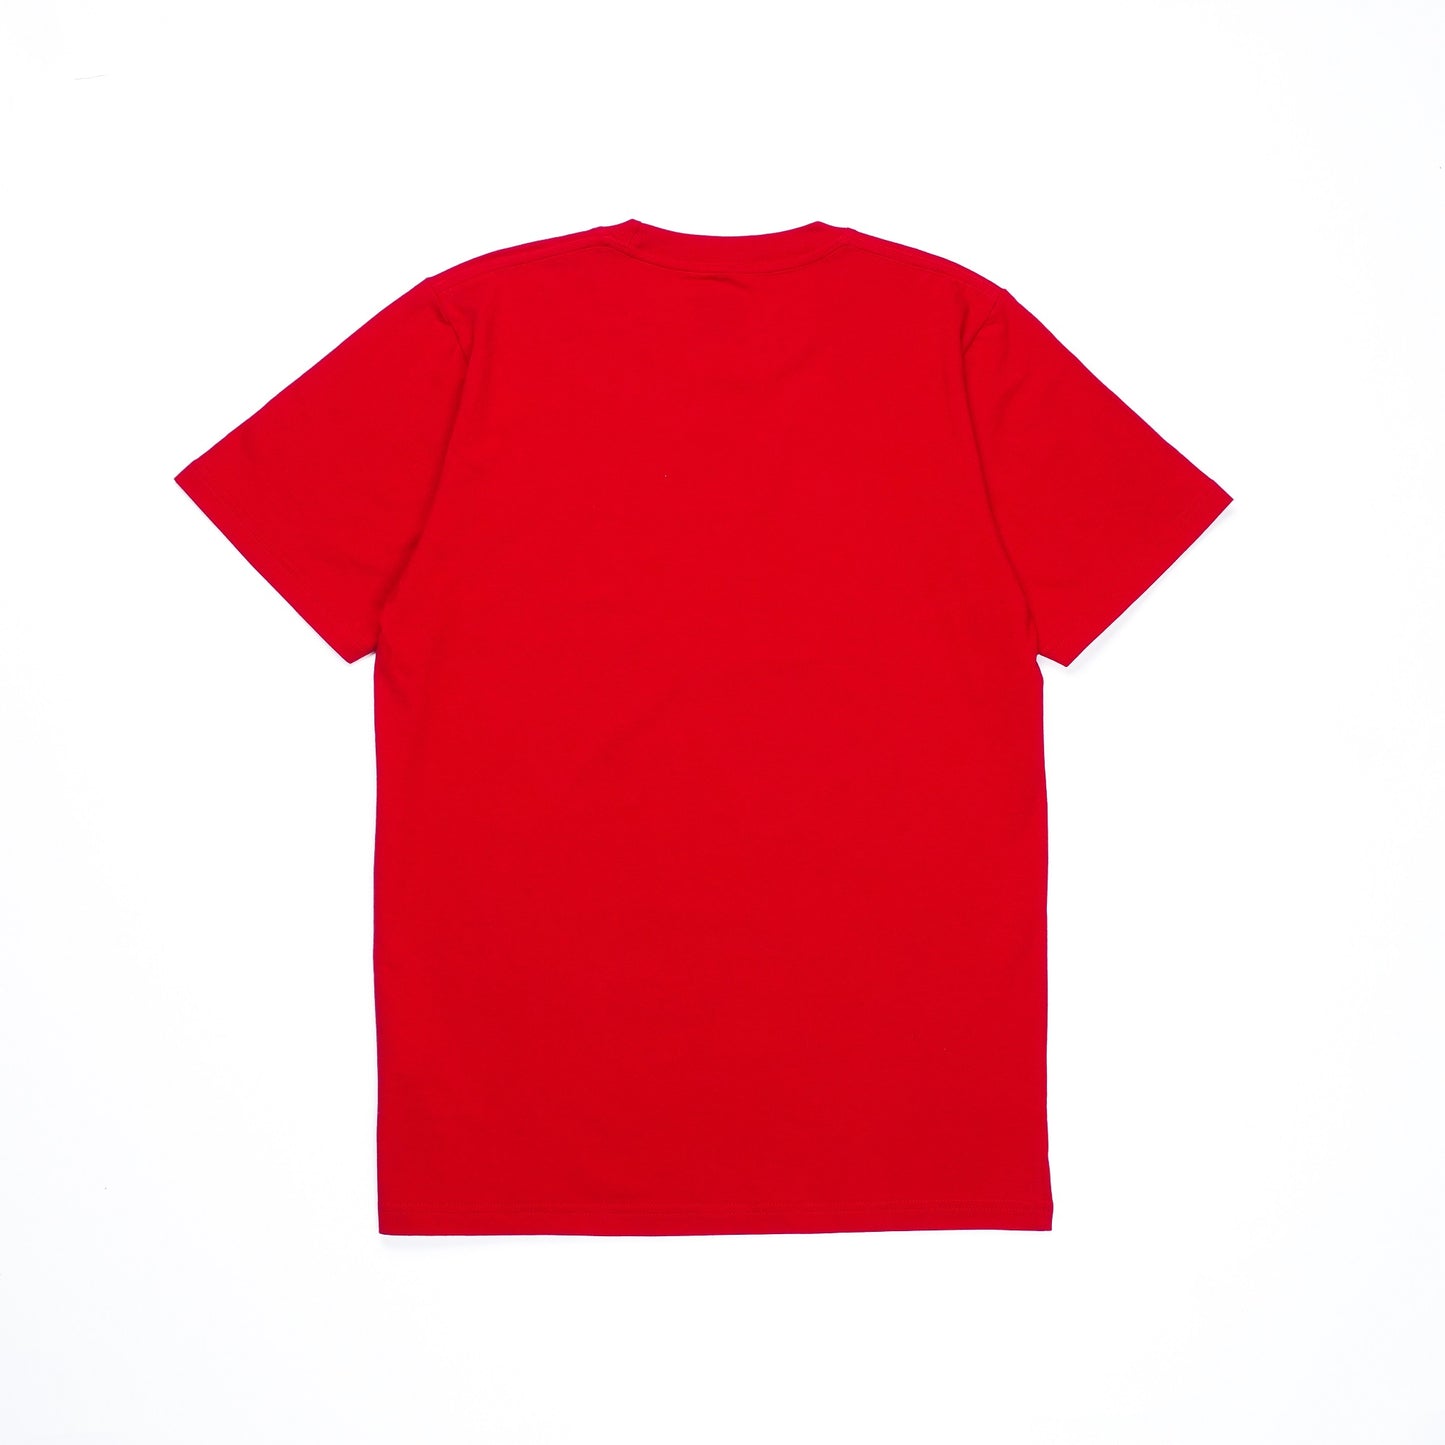 AZA DBL All Star 2022 T-Shirt - Red